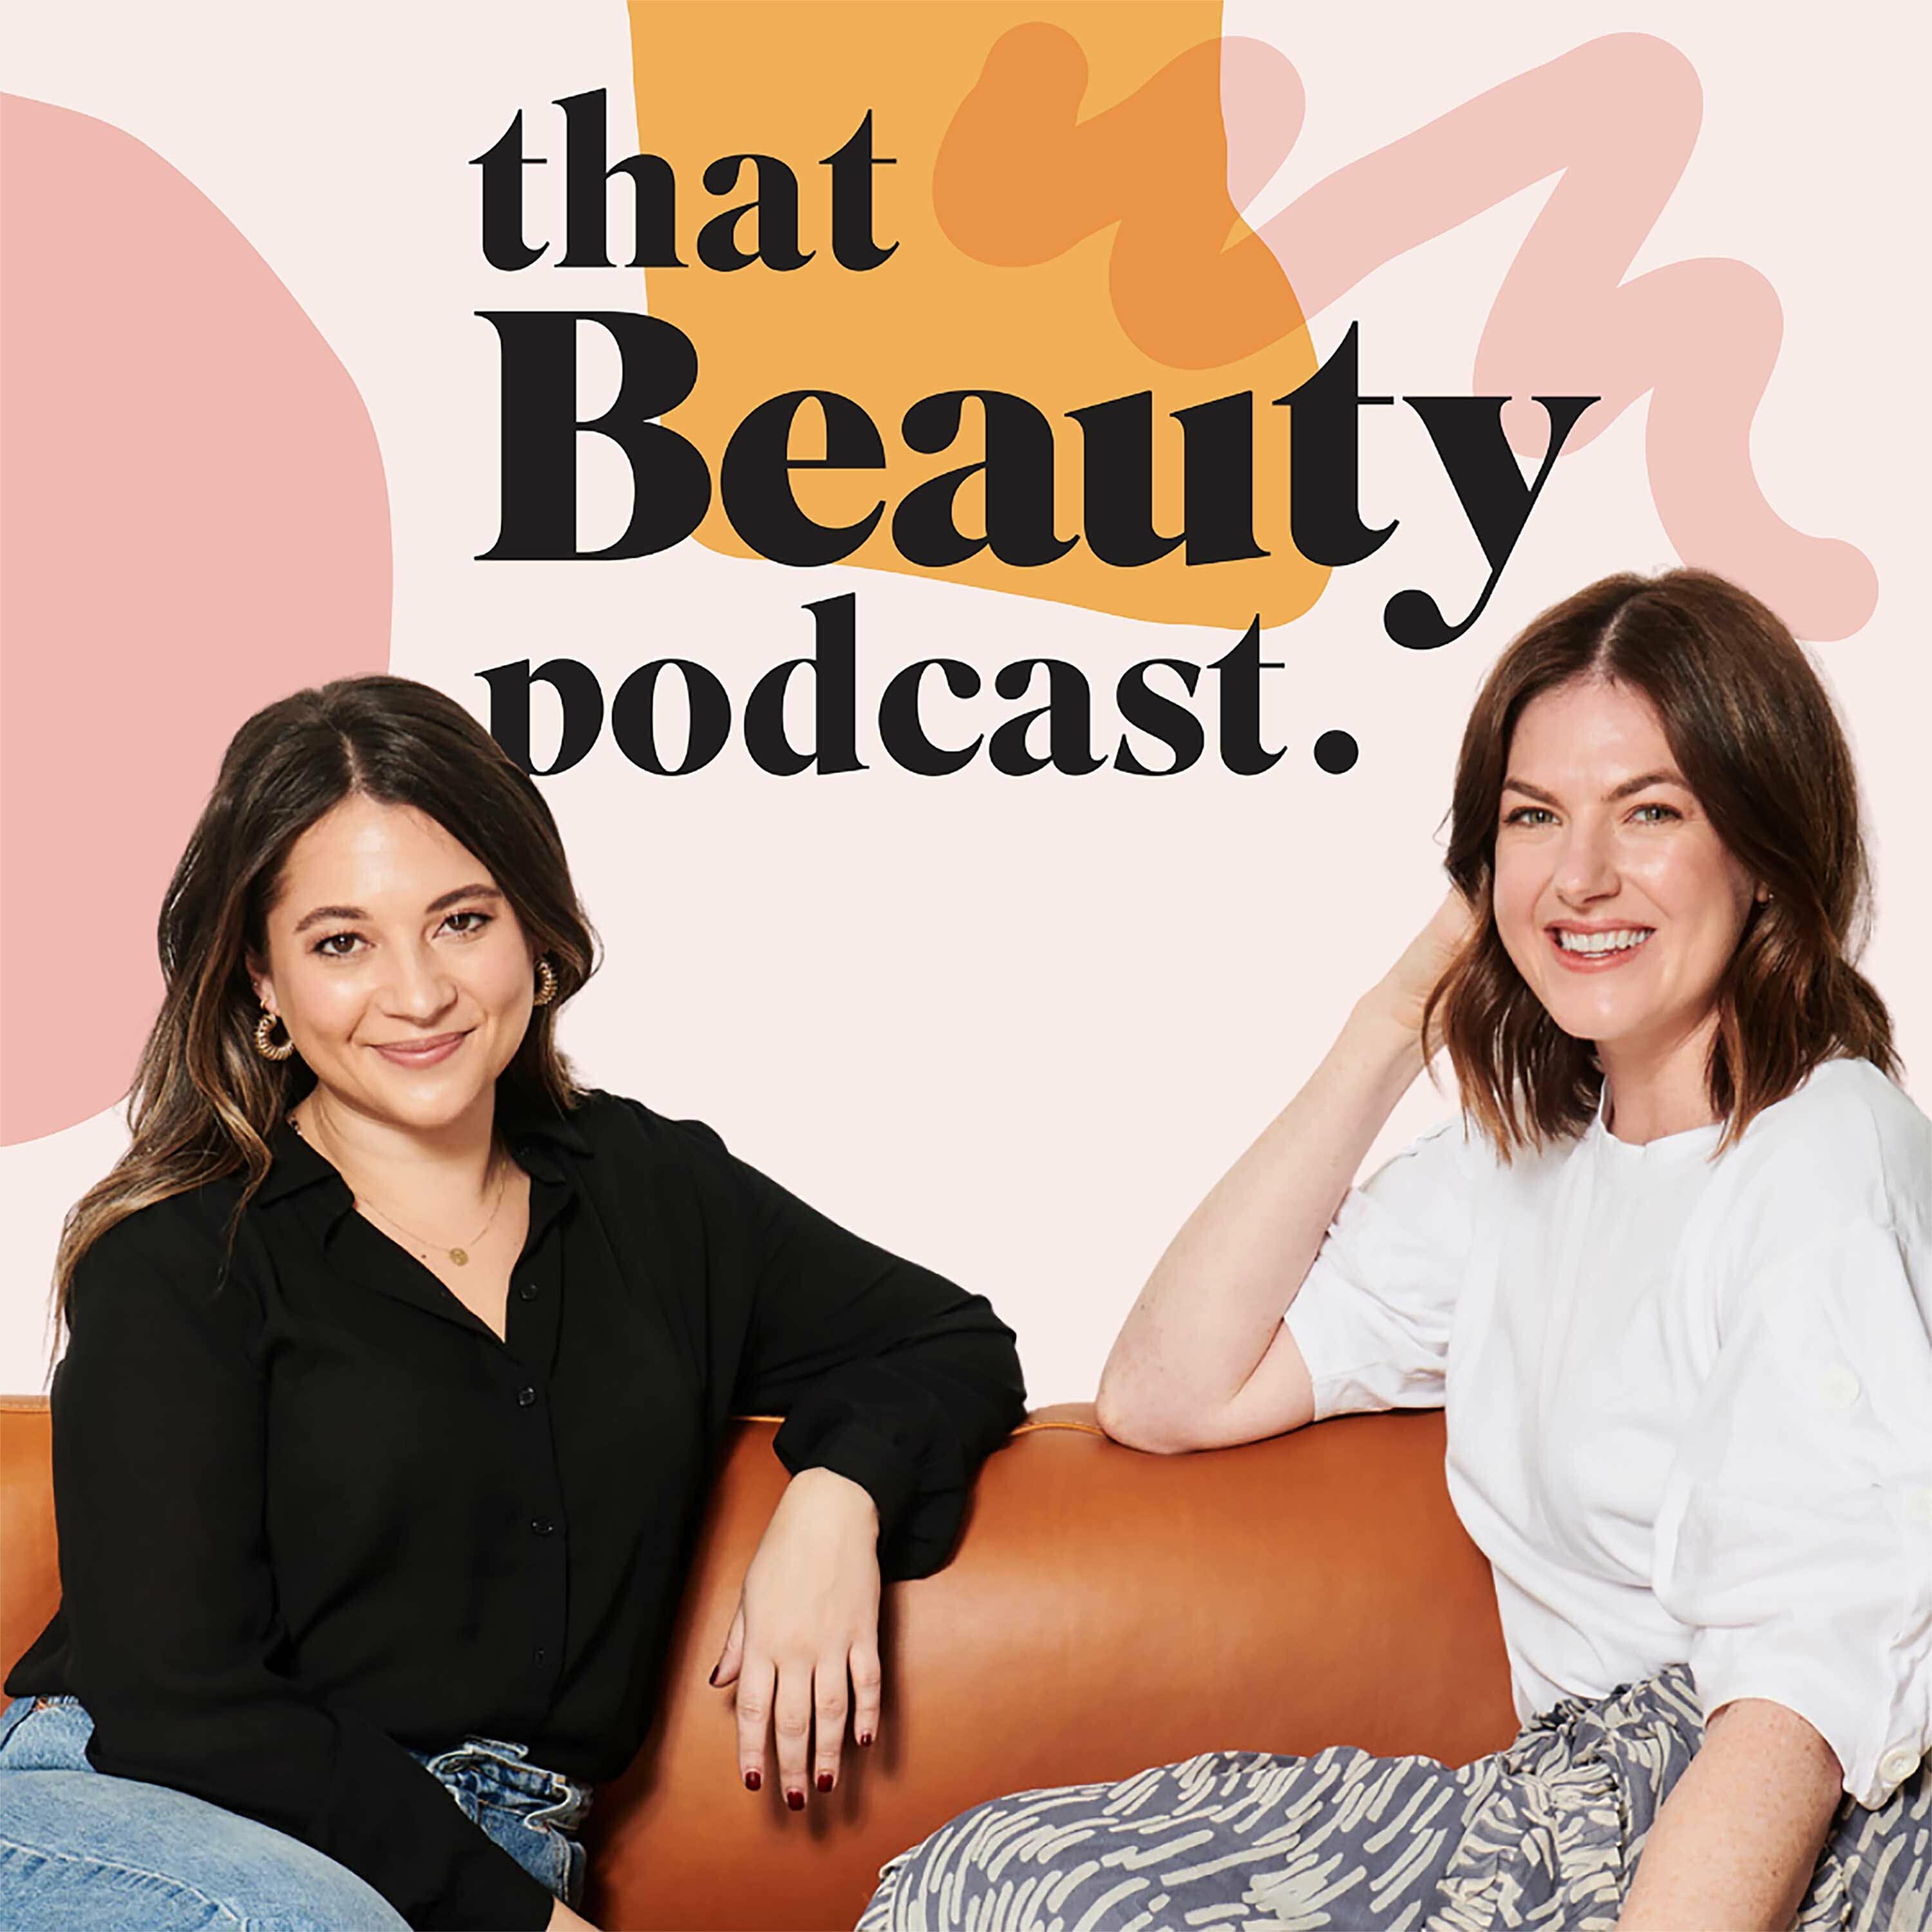 That Beauty Podcast | iHeartRadio